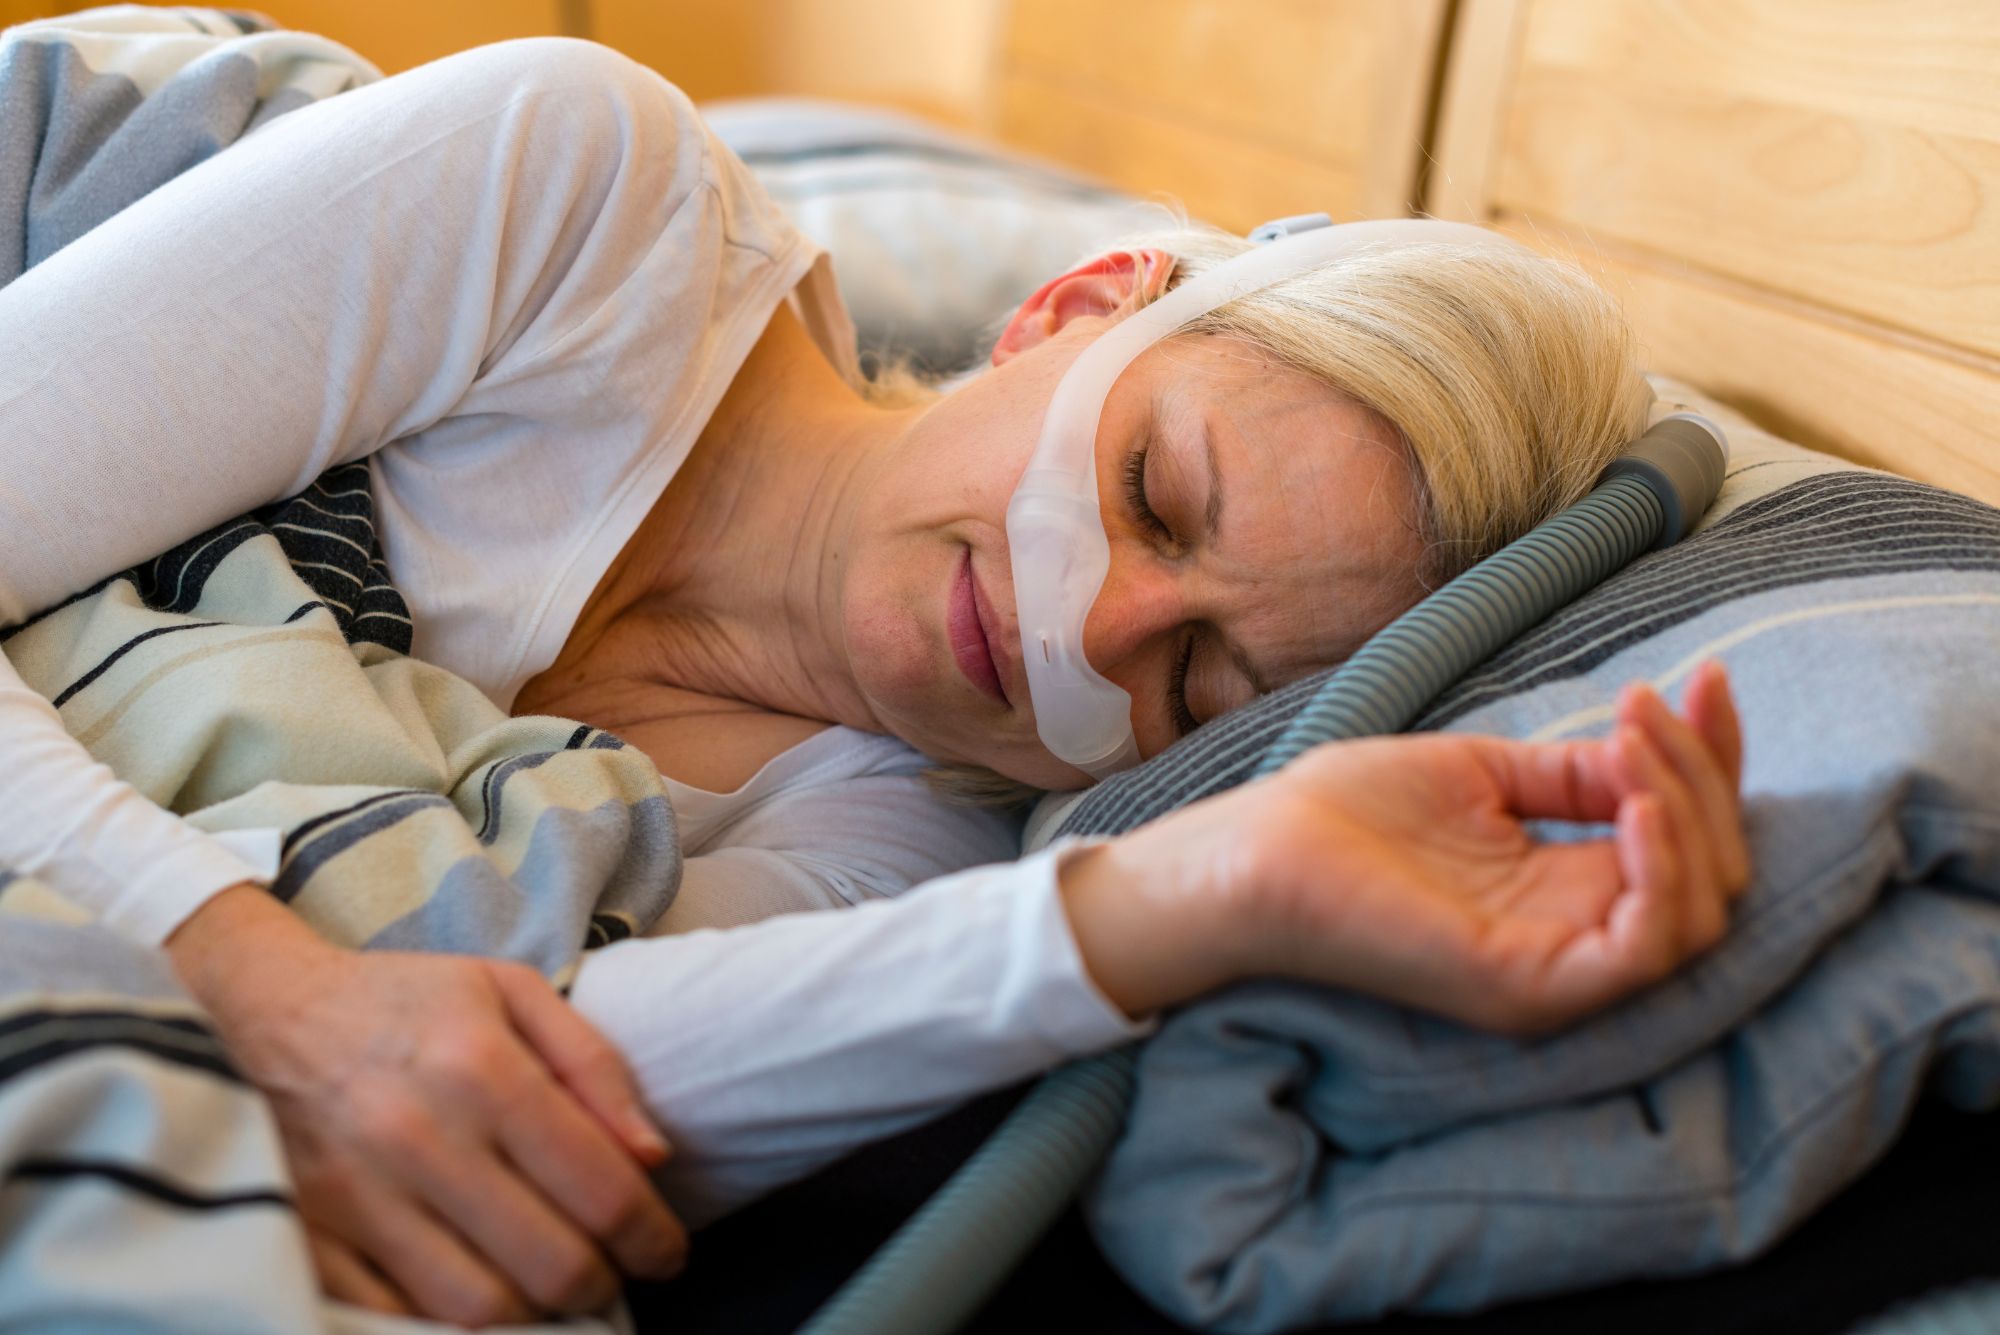 Ear Nose And Throat The Best Sleeping Position For Sleep Apnea Sufferers